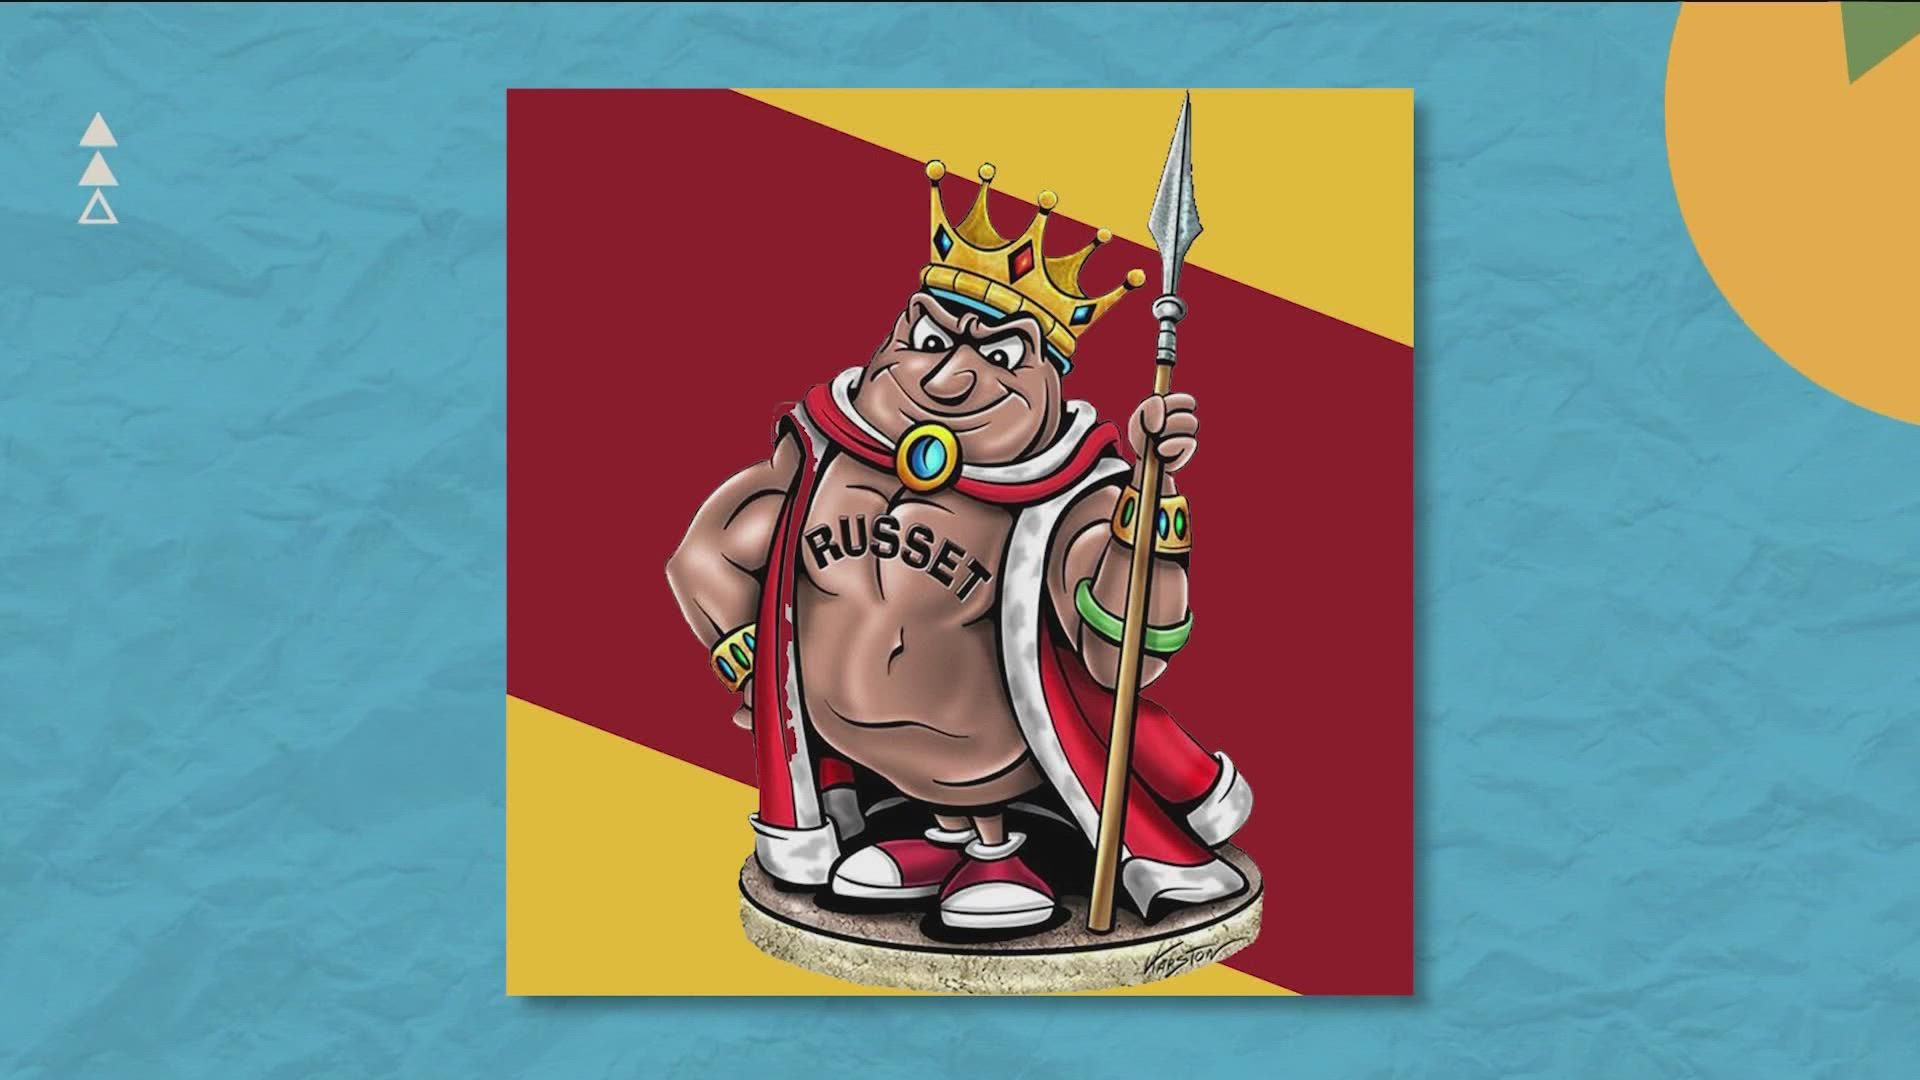 Scorebook Live recently launched an online contest to find the nation's best high school mascot. The Russets finished in second place, behind the Rhinelander Hodags.